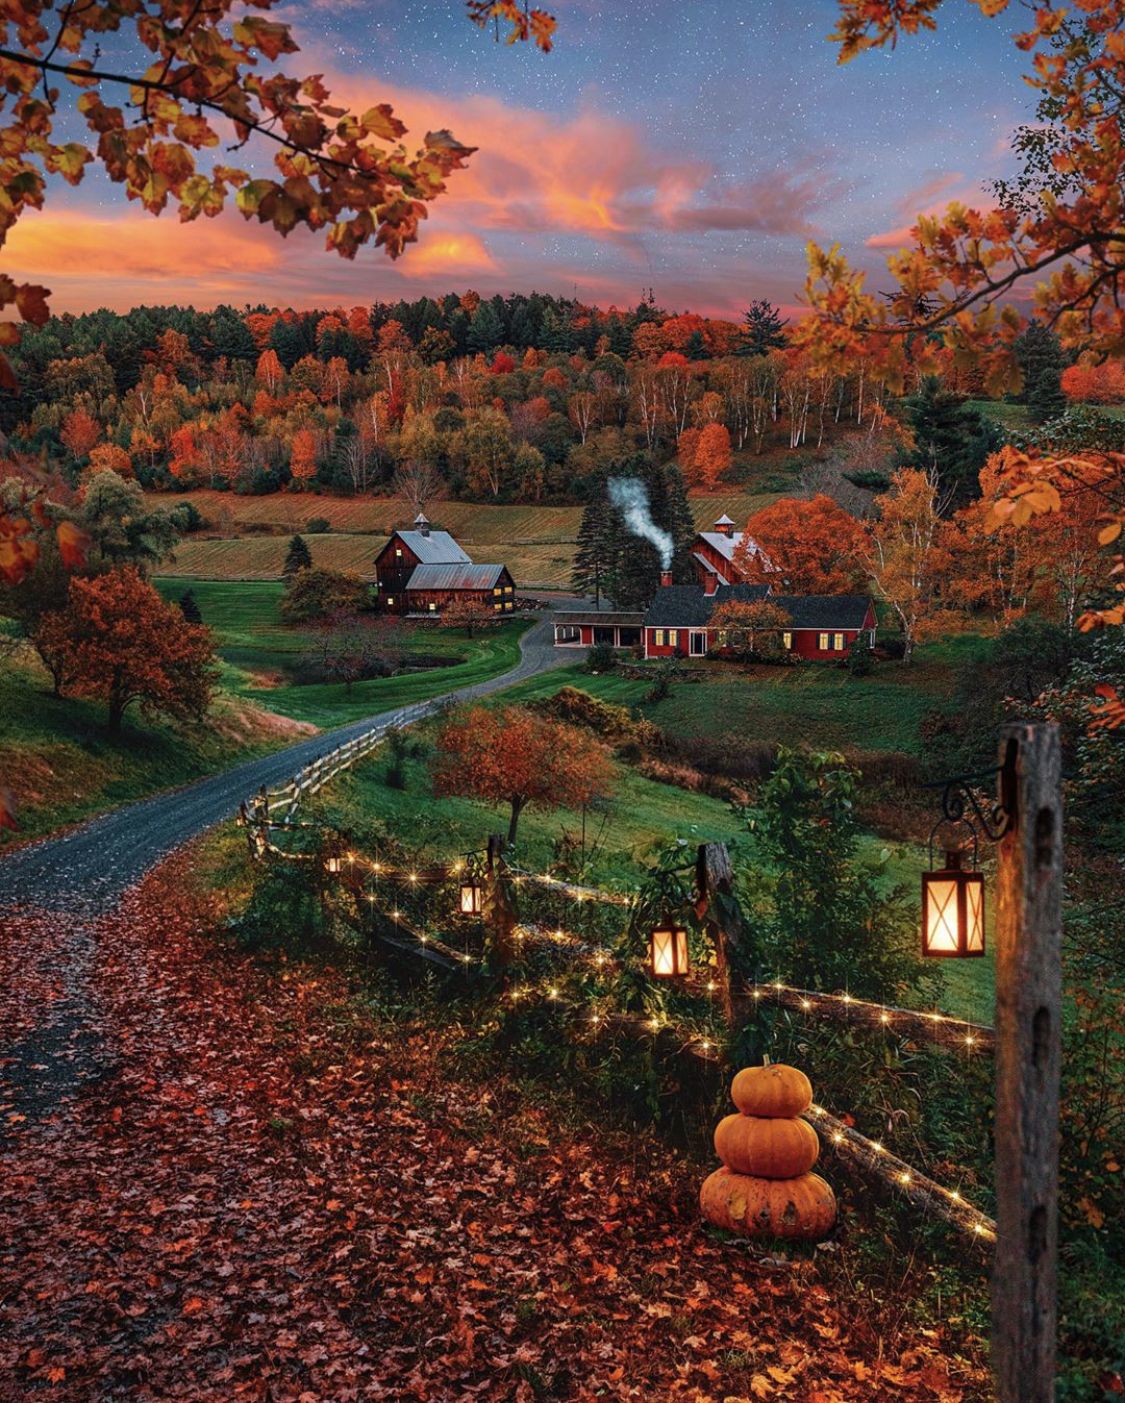 Getting Ready for Fall in New England. By Georgia Grace. Autumn scenery, Autumn scenes, Autumn photography